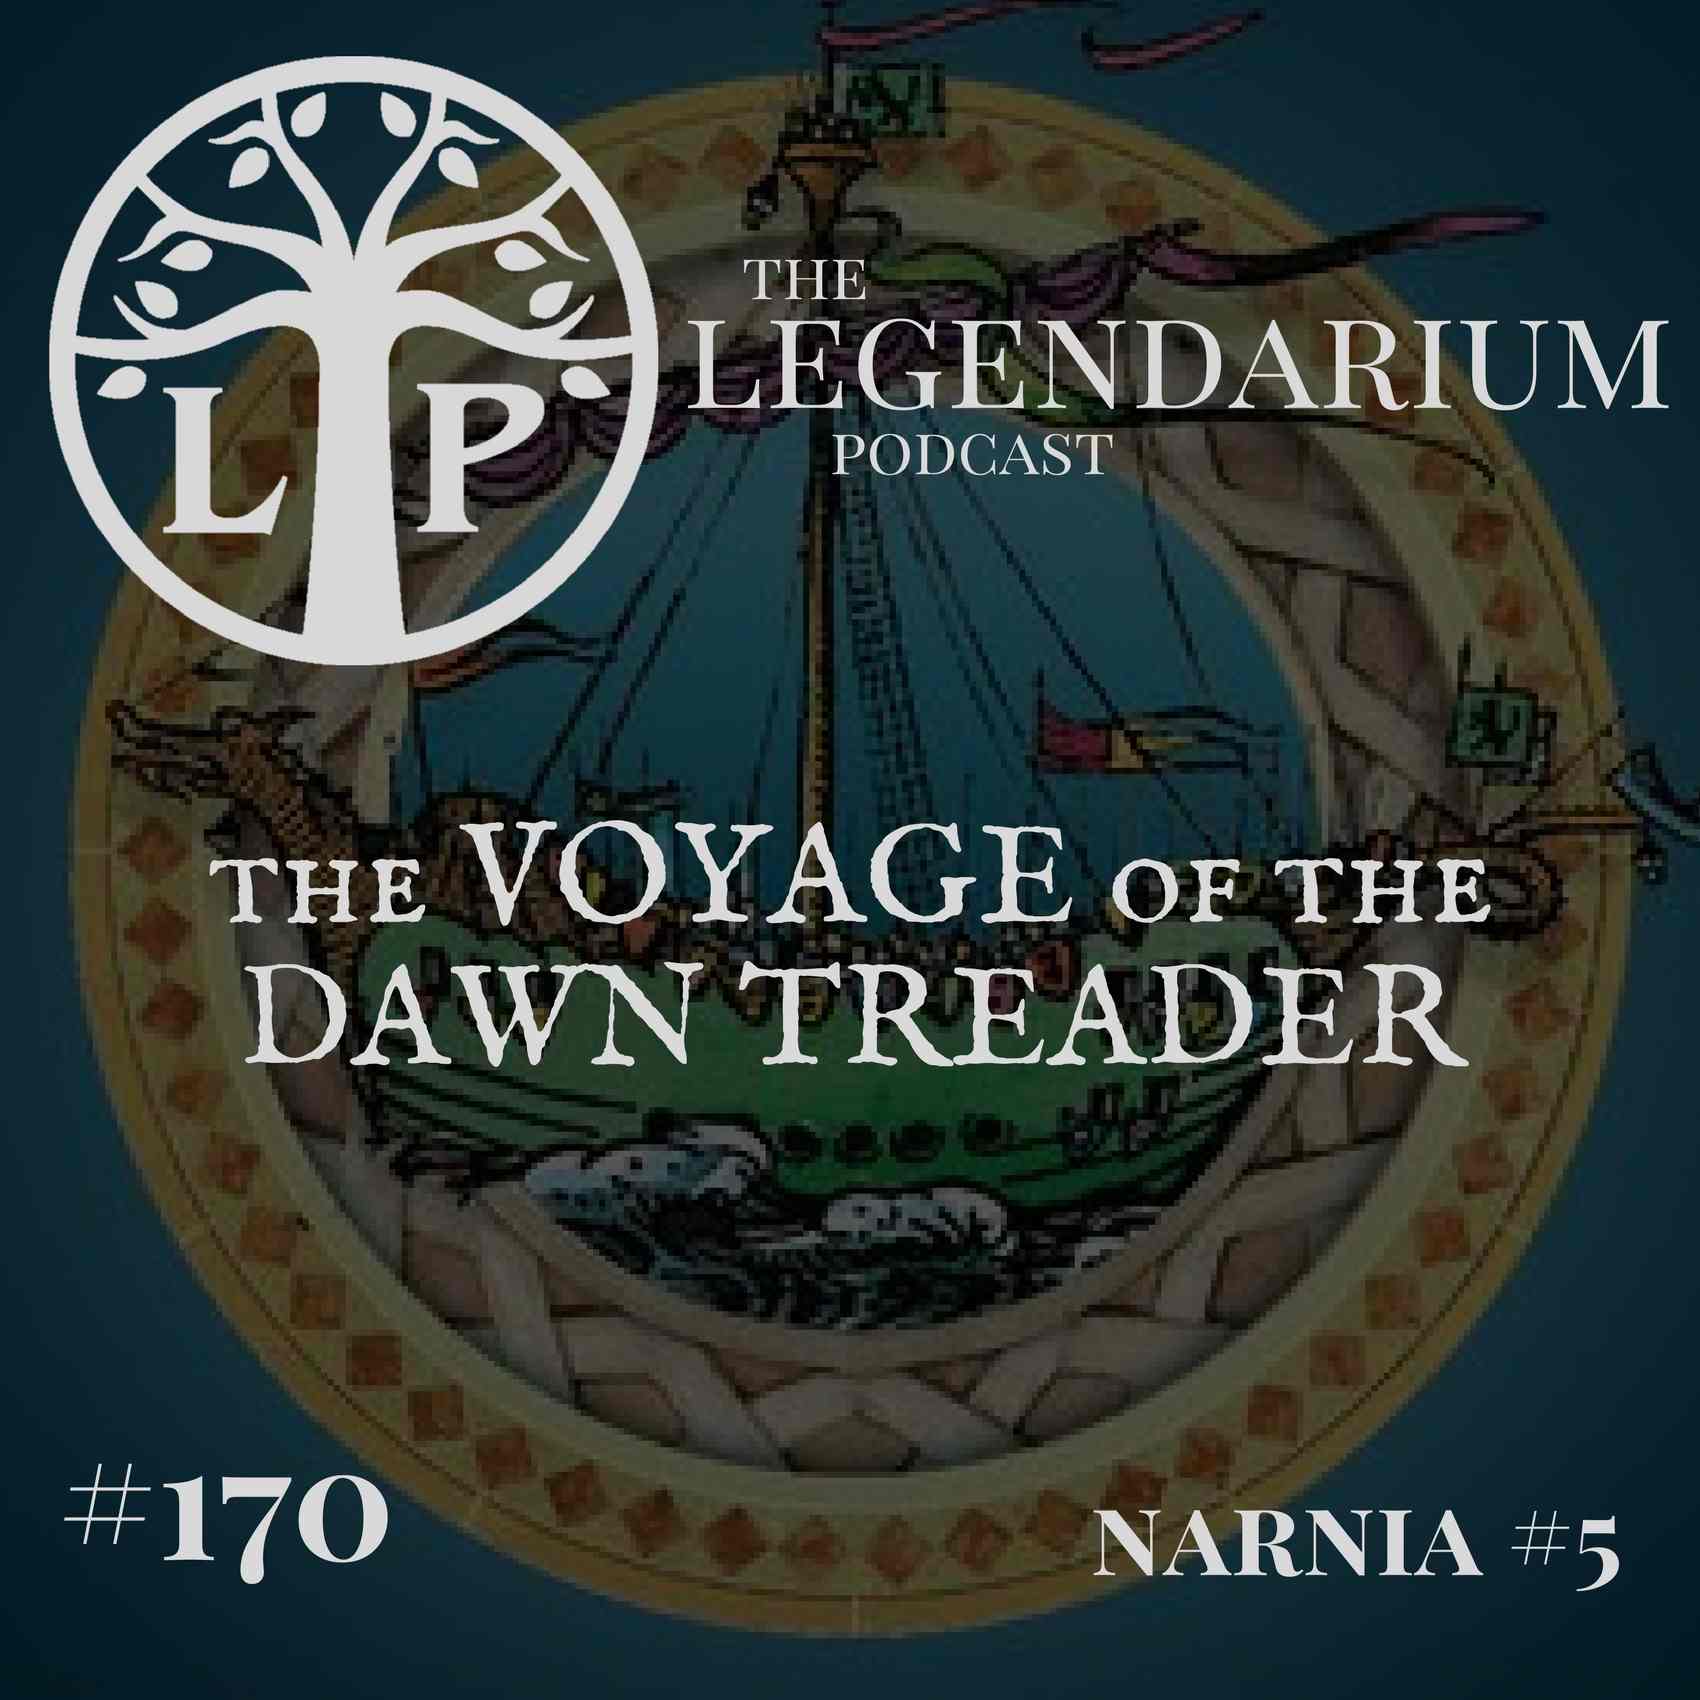 #170. The Voyage of the Dawn Treader (Narnia #5)